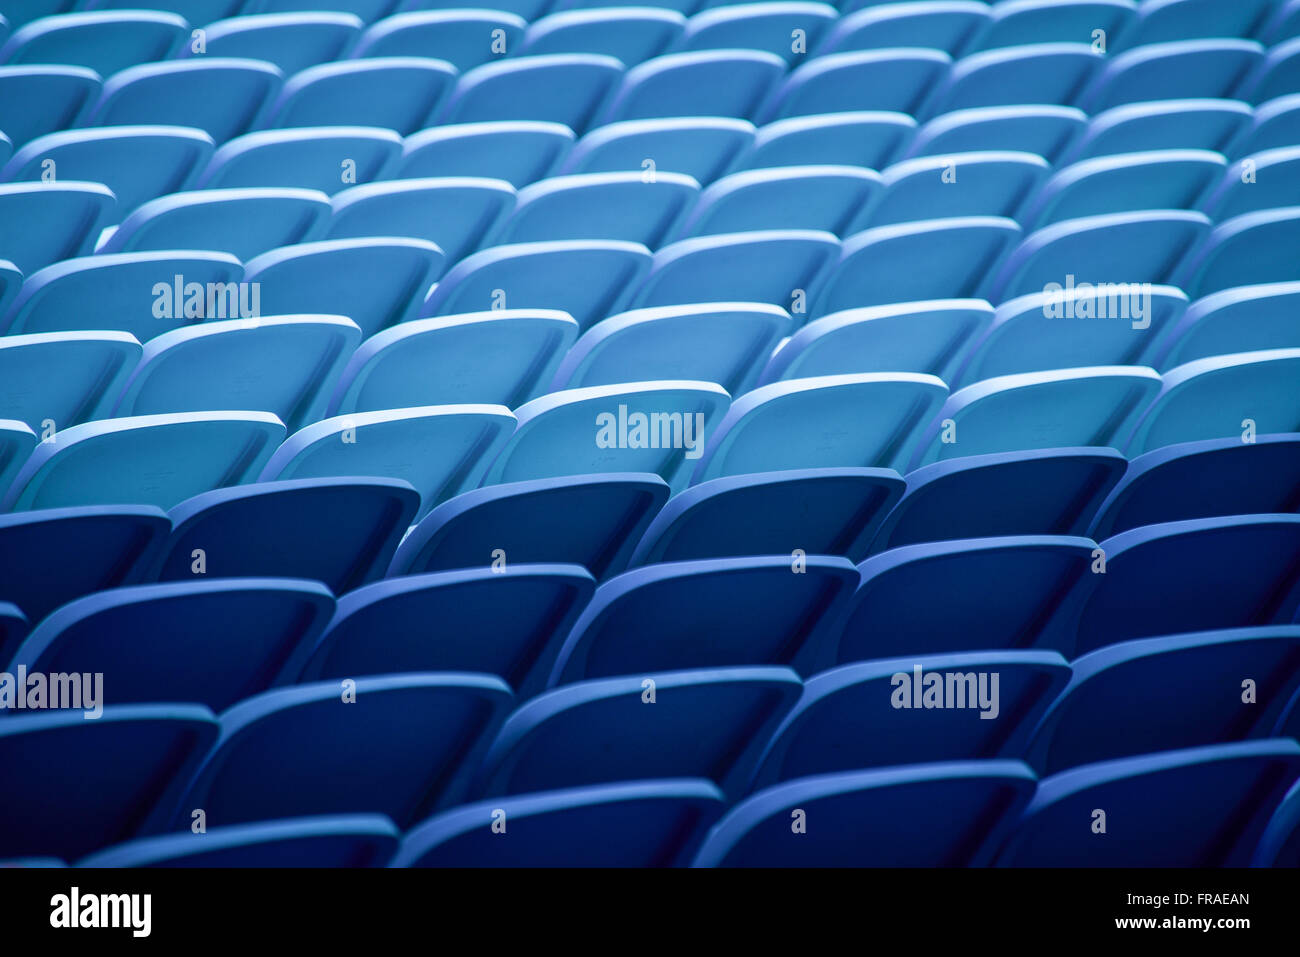 Detail Of Blue Chairs In The Football Stadium Bleachers Stock